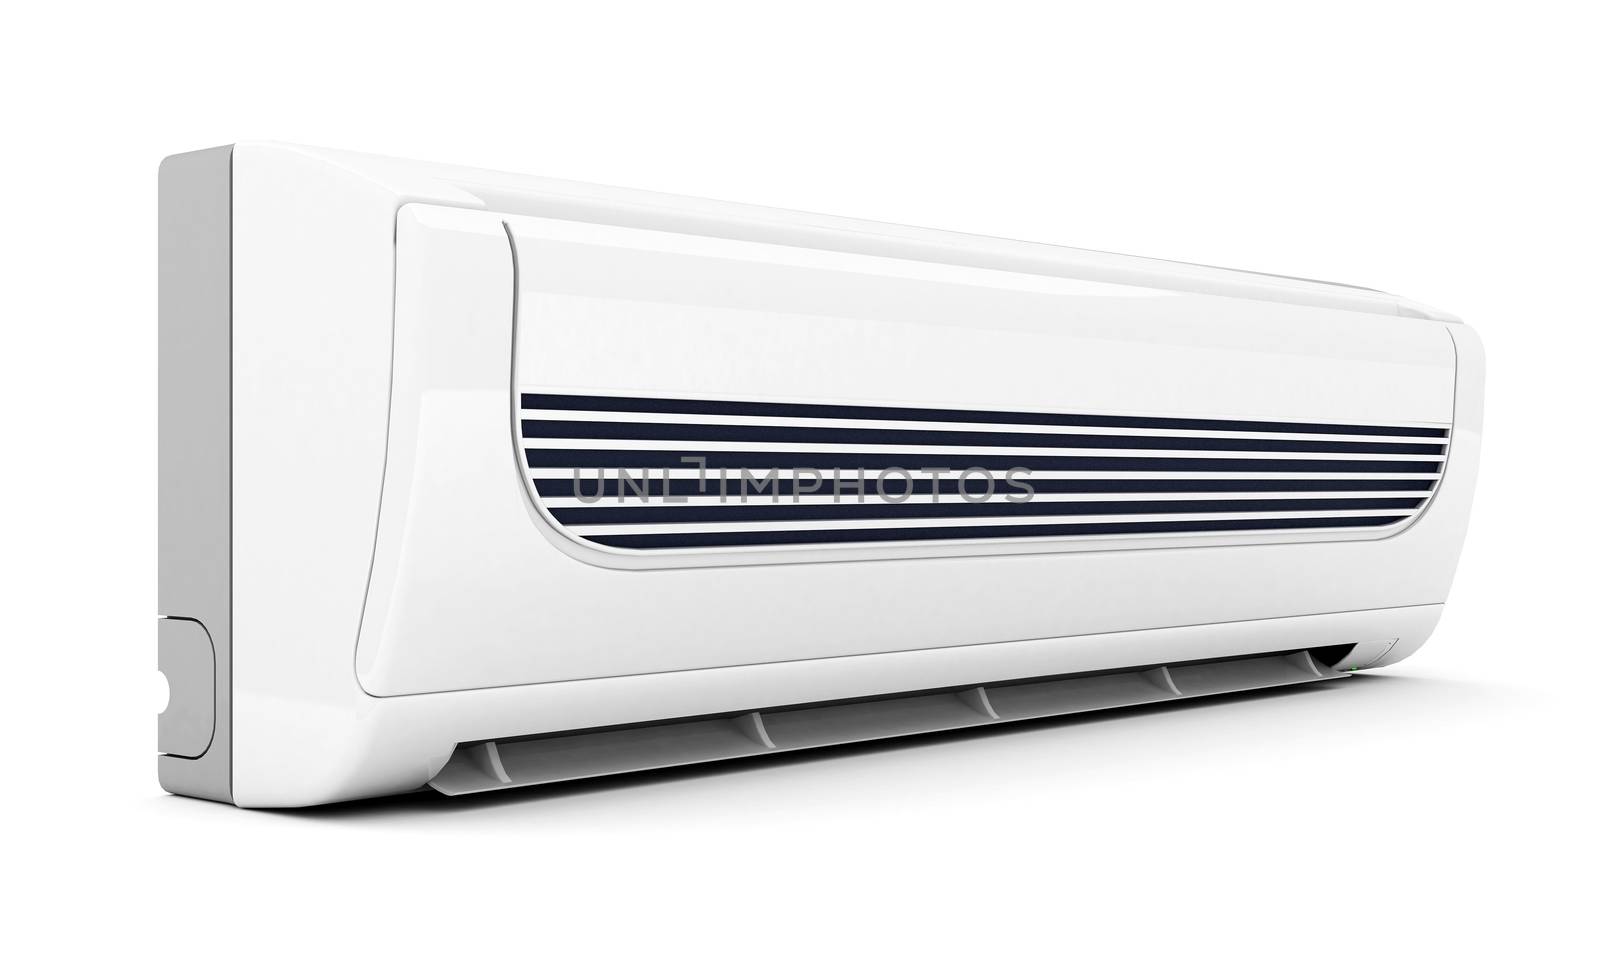 Image of modern air conditioner isolated on a white background